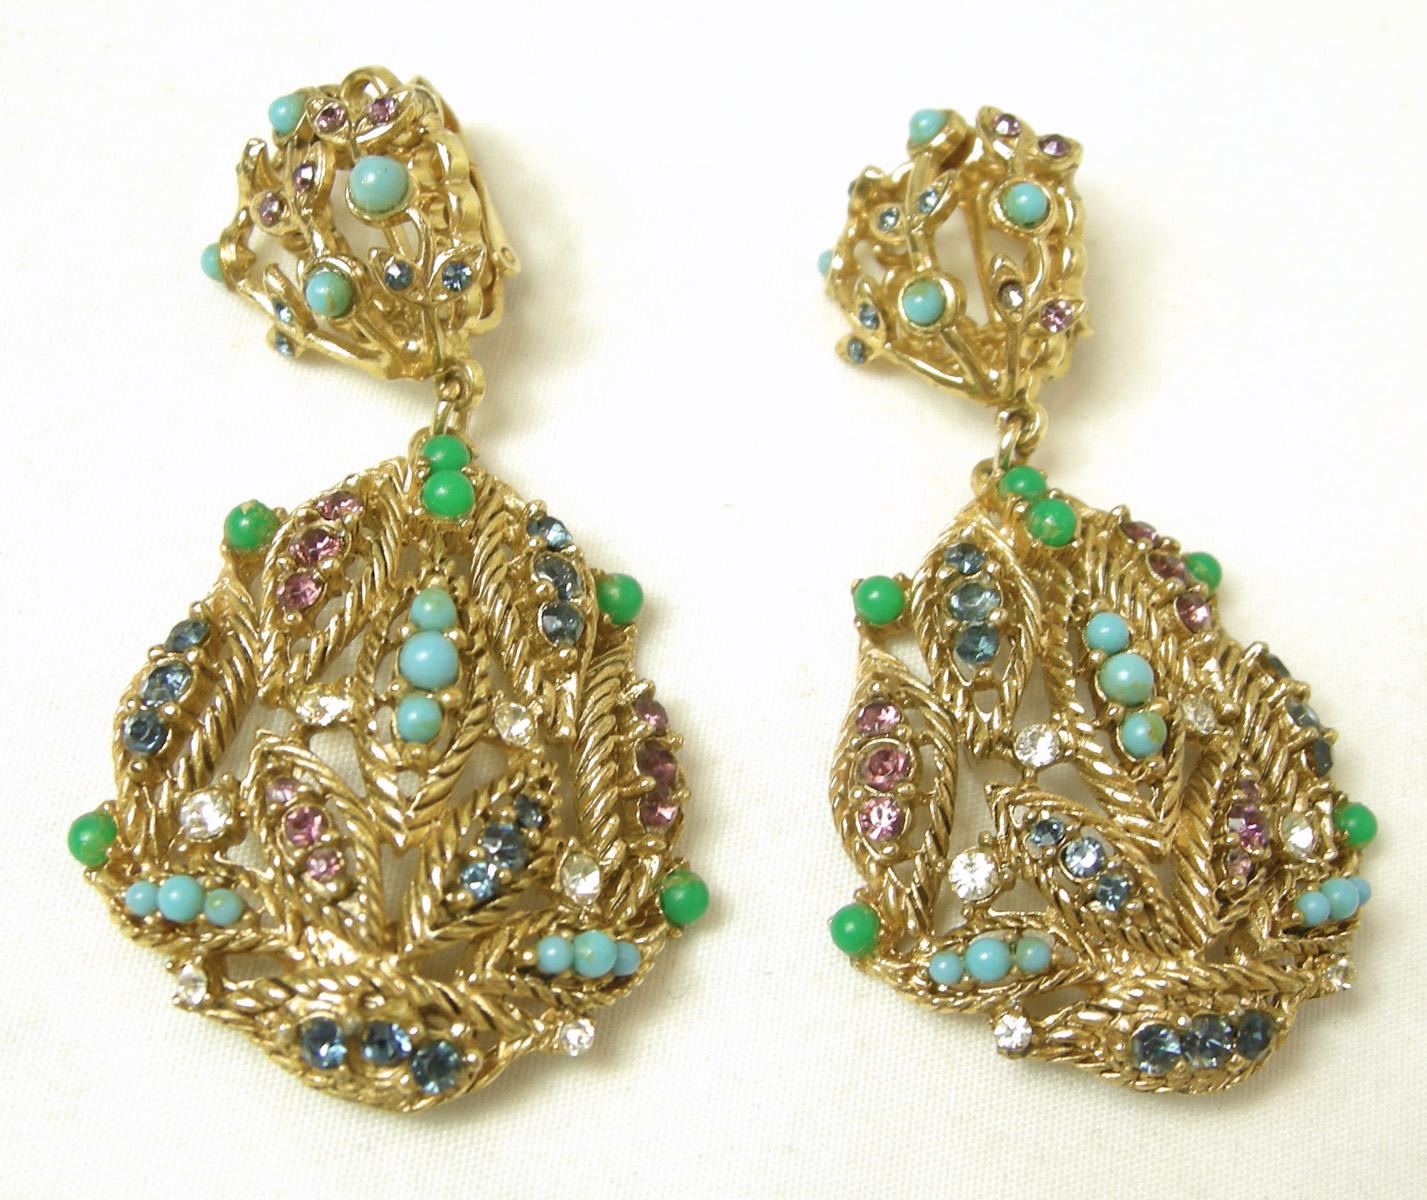 When I first saw these beautiful drop earrings, I thought they were made by Florenza, but there is no signature.  It has all the great qualities of Florenza.  The intricate workmanship combining faux stones like turquoise, amethyst, sapphires.  They